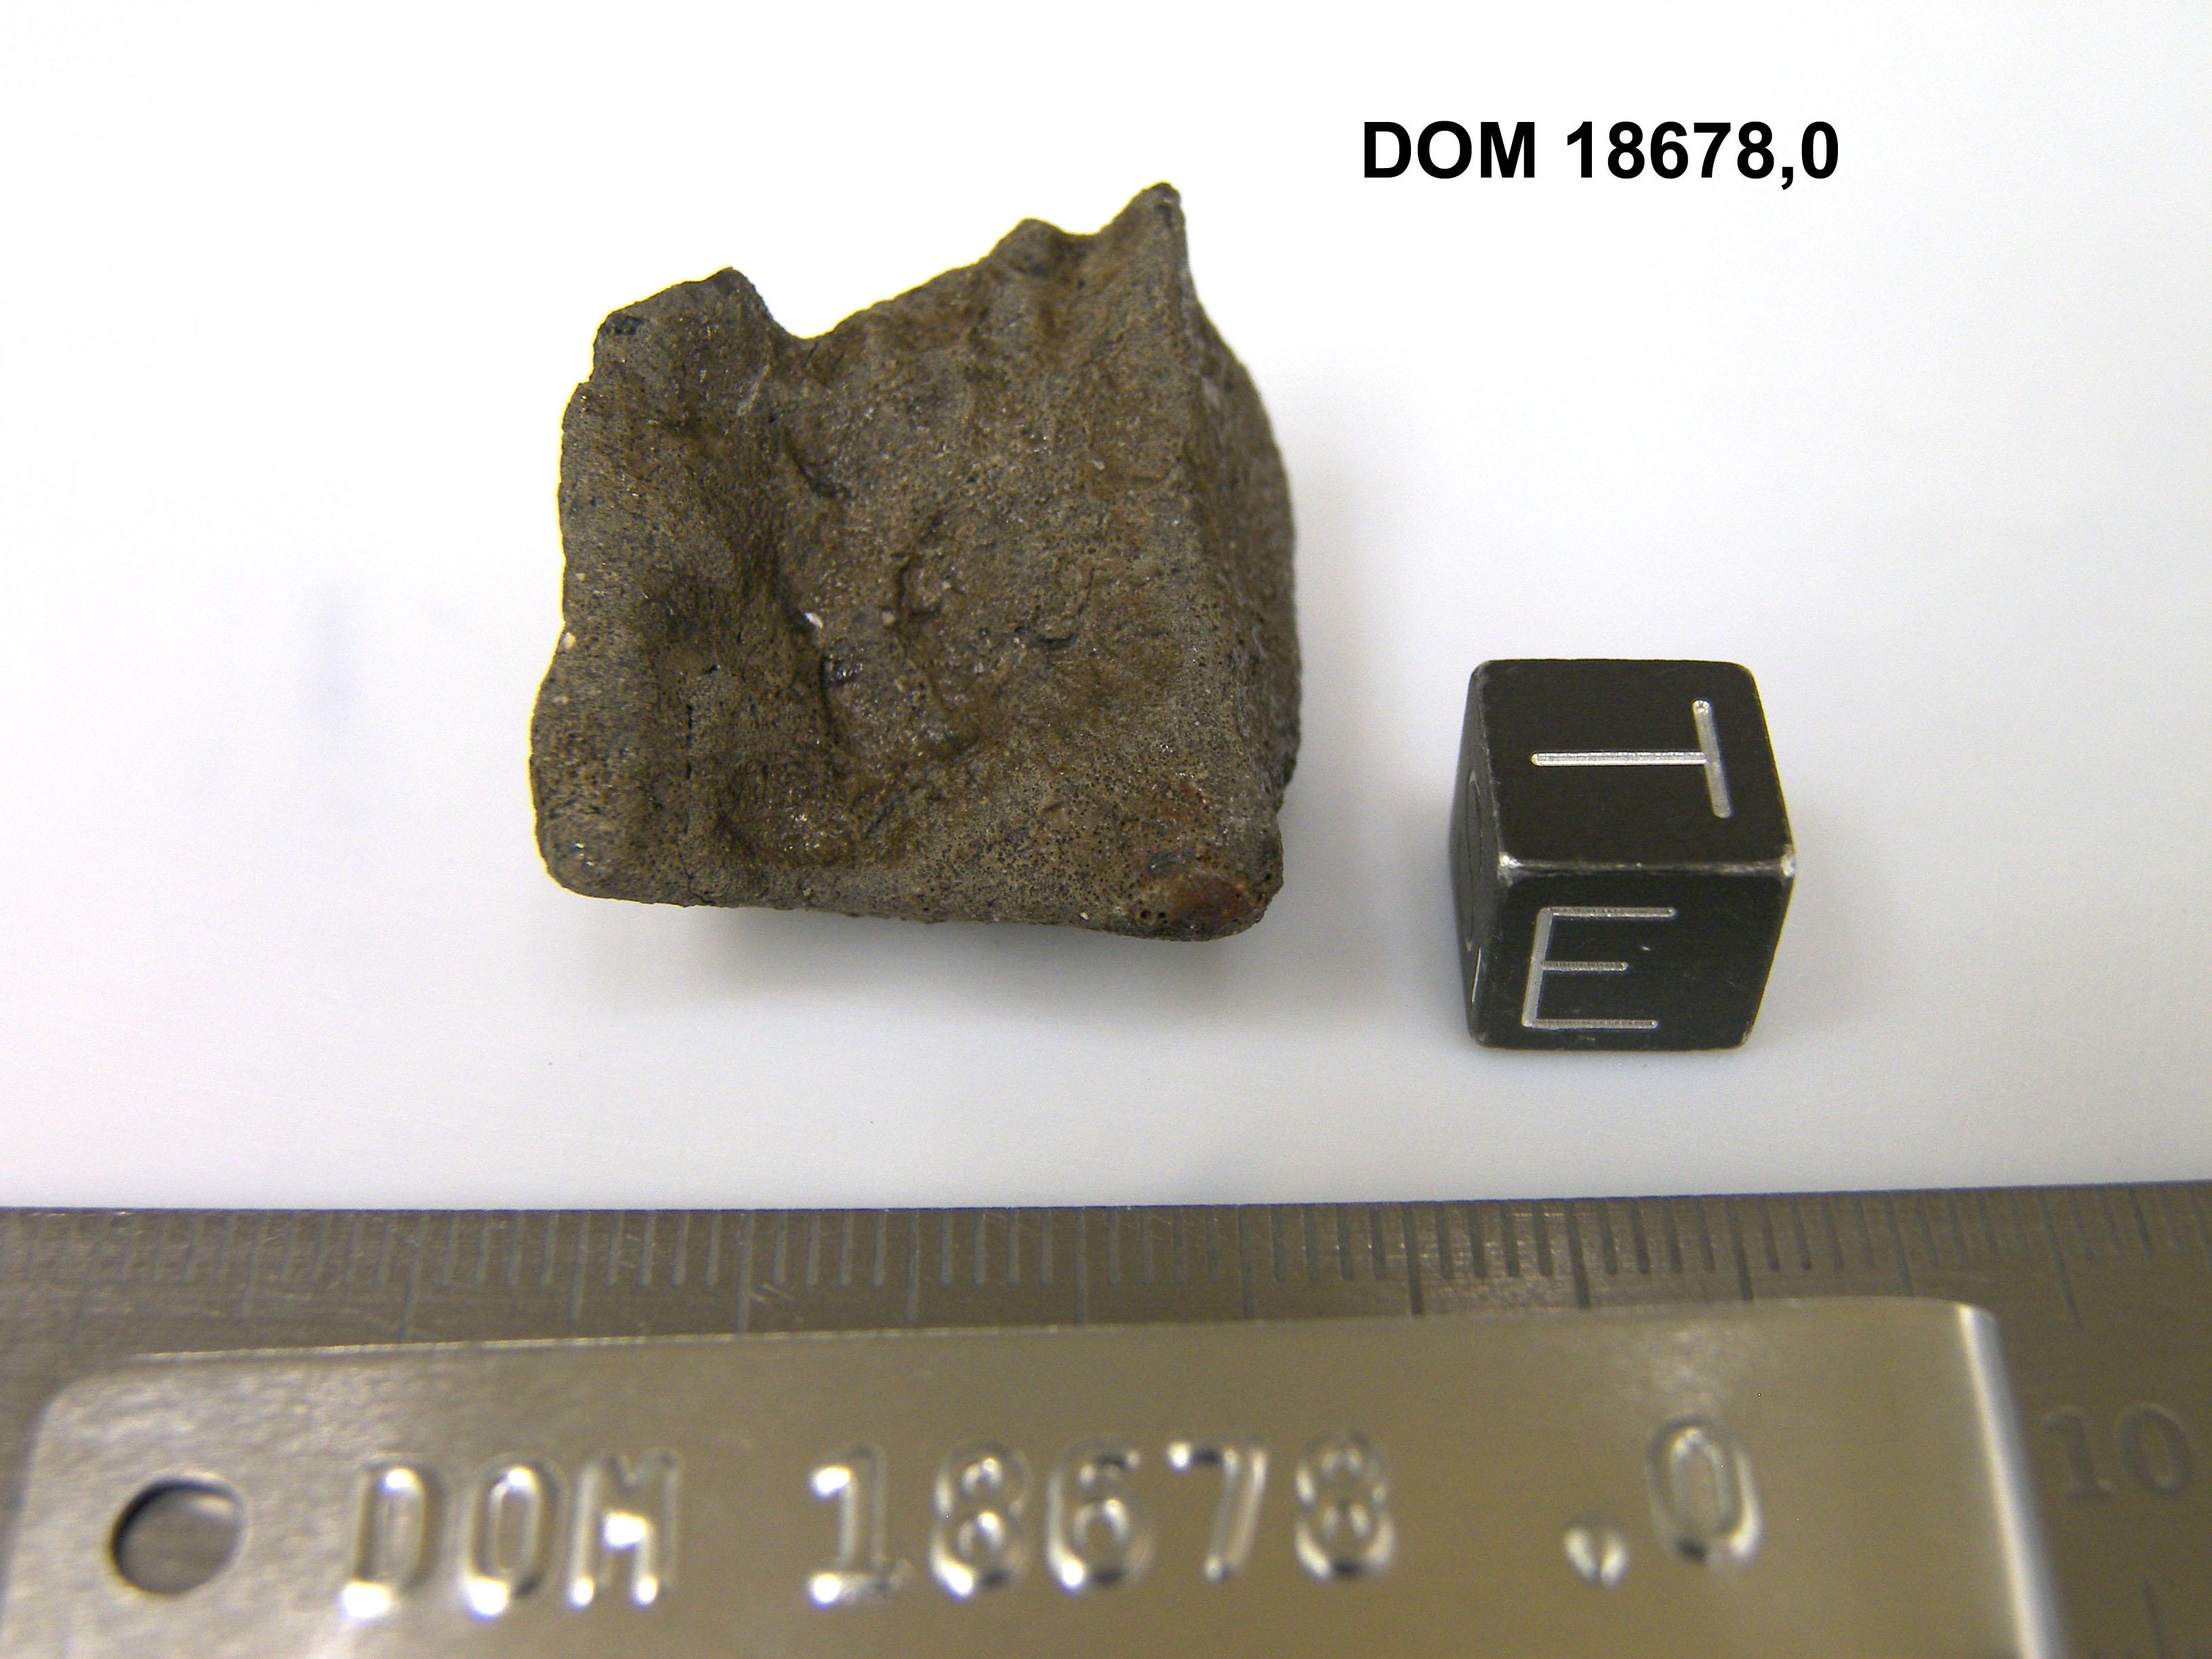 Lab Photo of Sample DOM 18678 Displaying East Orientation